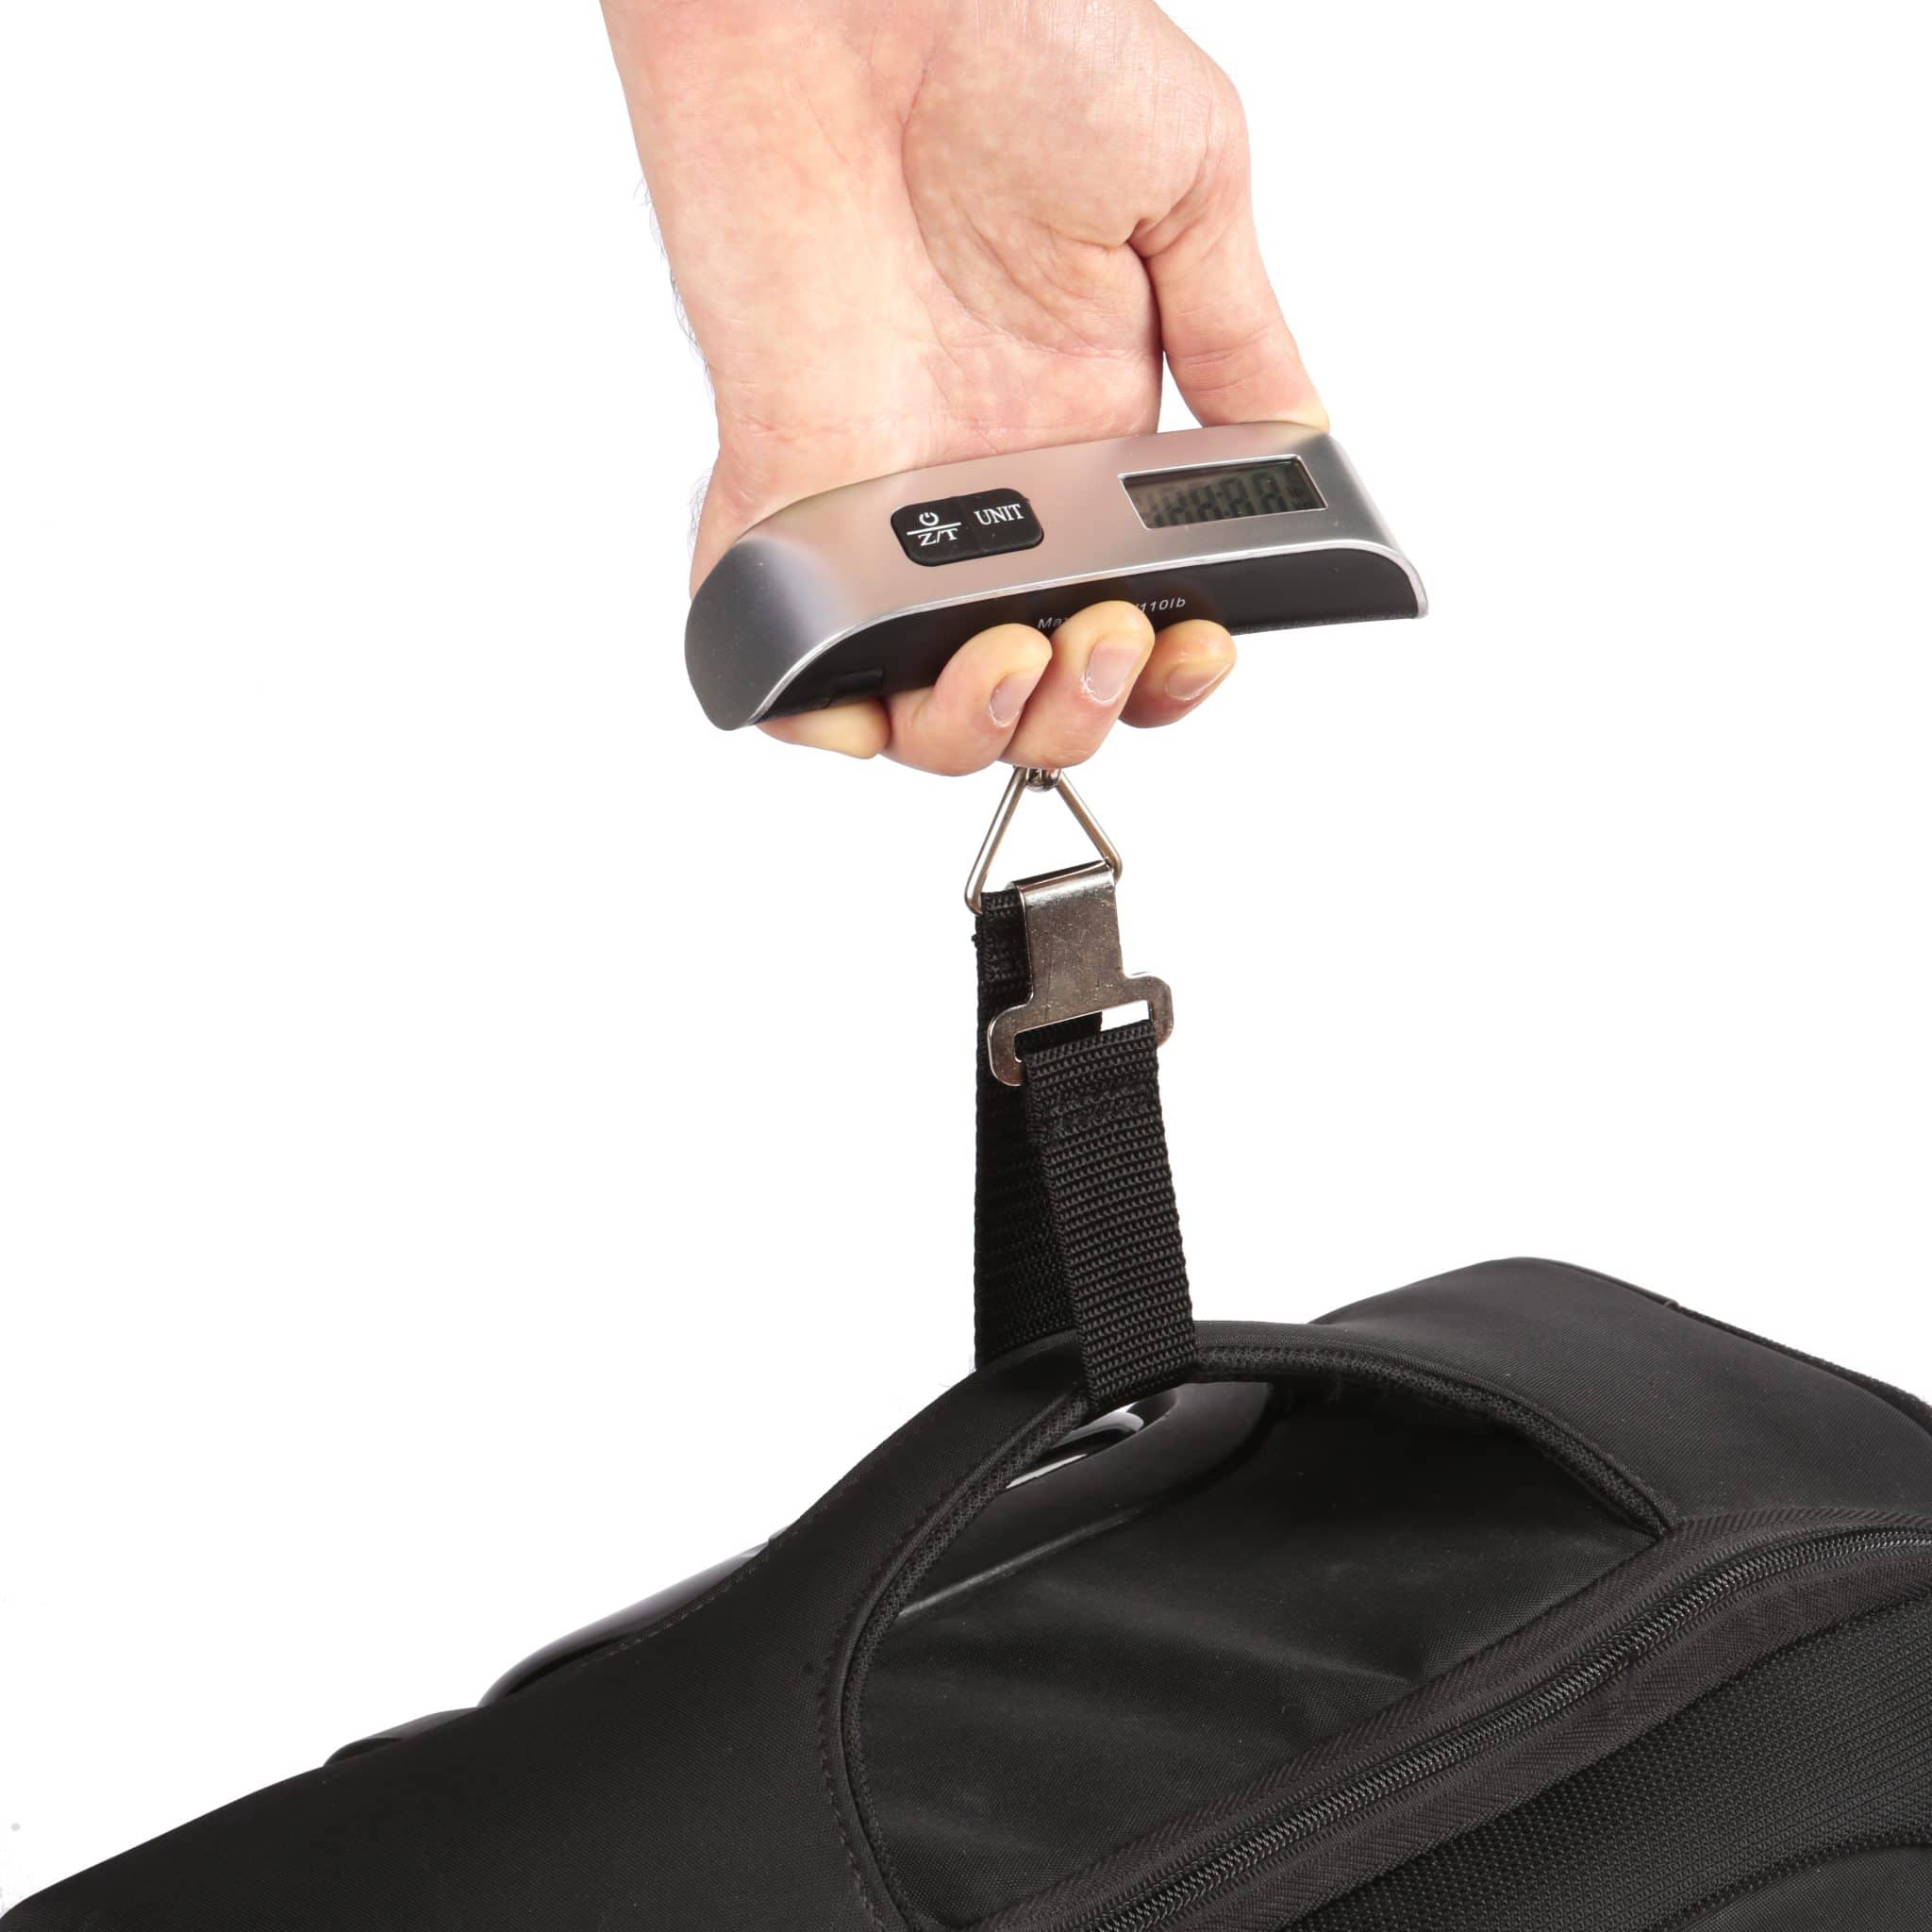 FREETOO Portable Luggage Scale Digital Travel Scale Suitcase Scales Weights  with Tare Function 110 lb/ 50KG Capacity